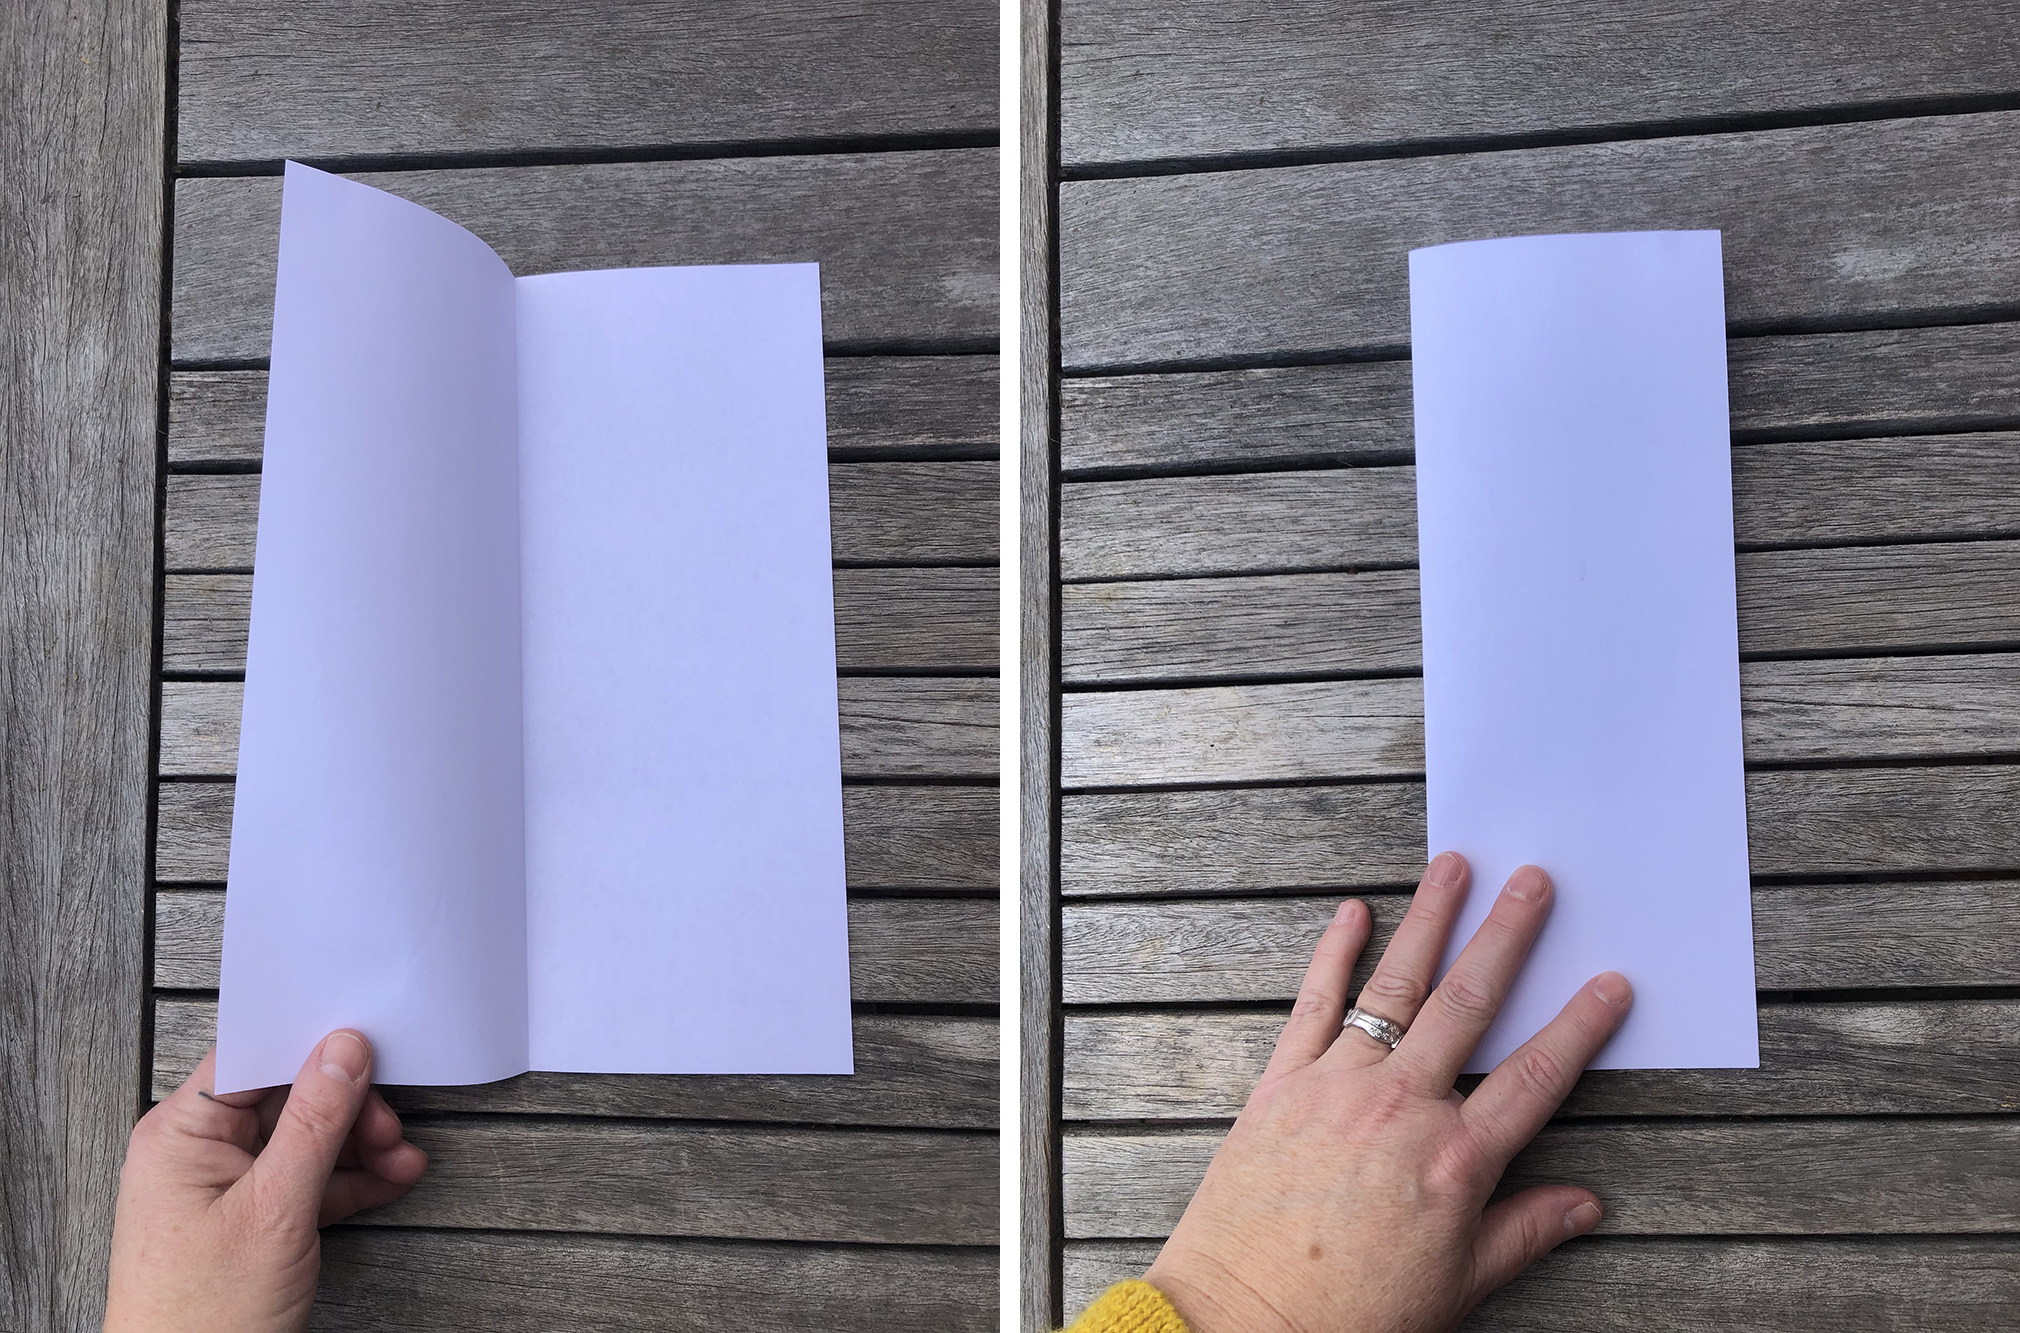 two images side by side showing a white piece of paper folded in half lengthwise, like a hotdog bun